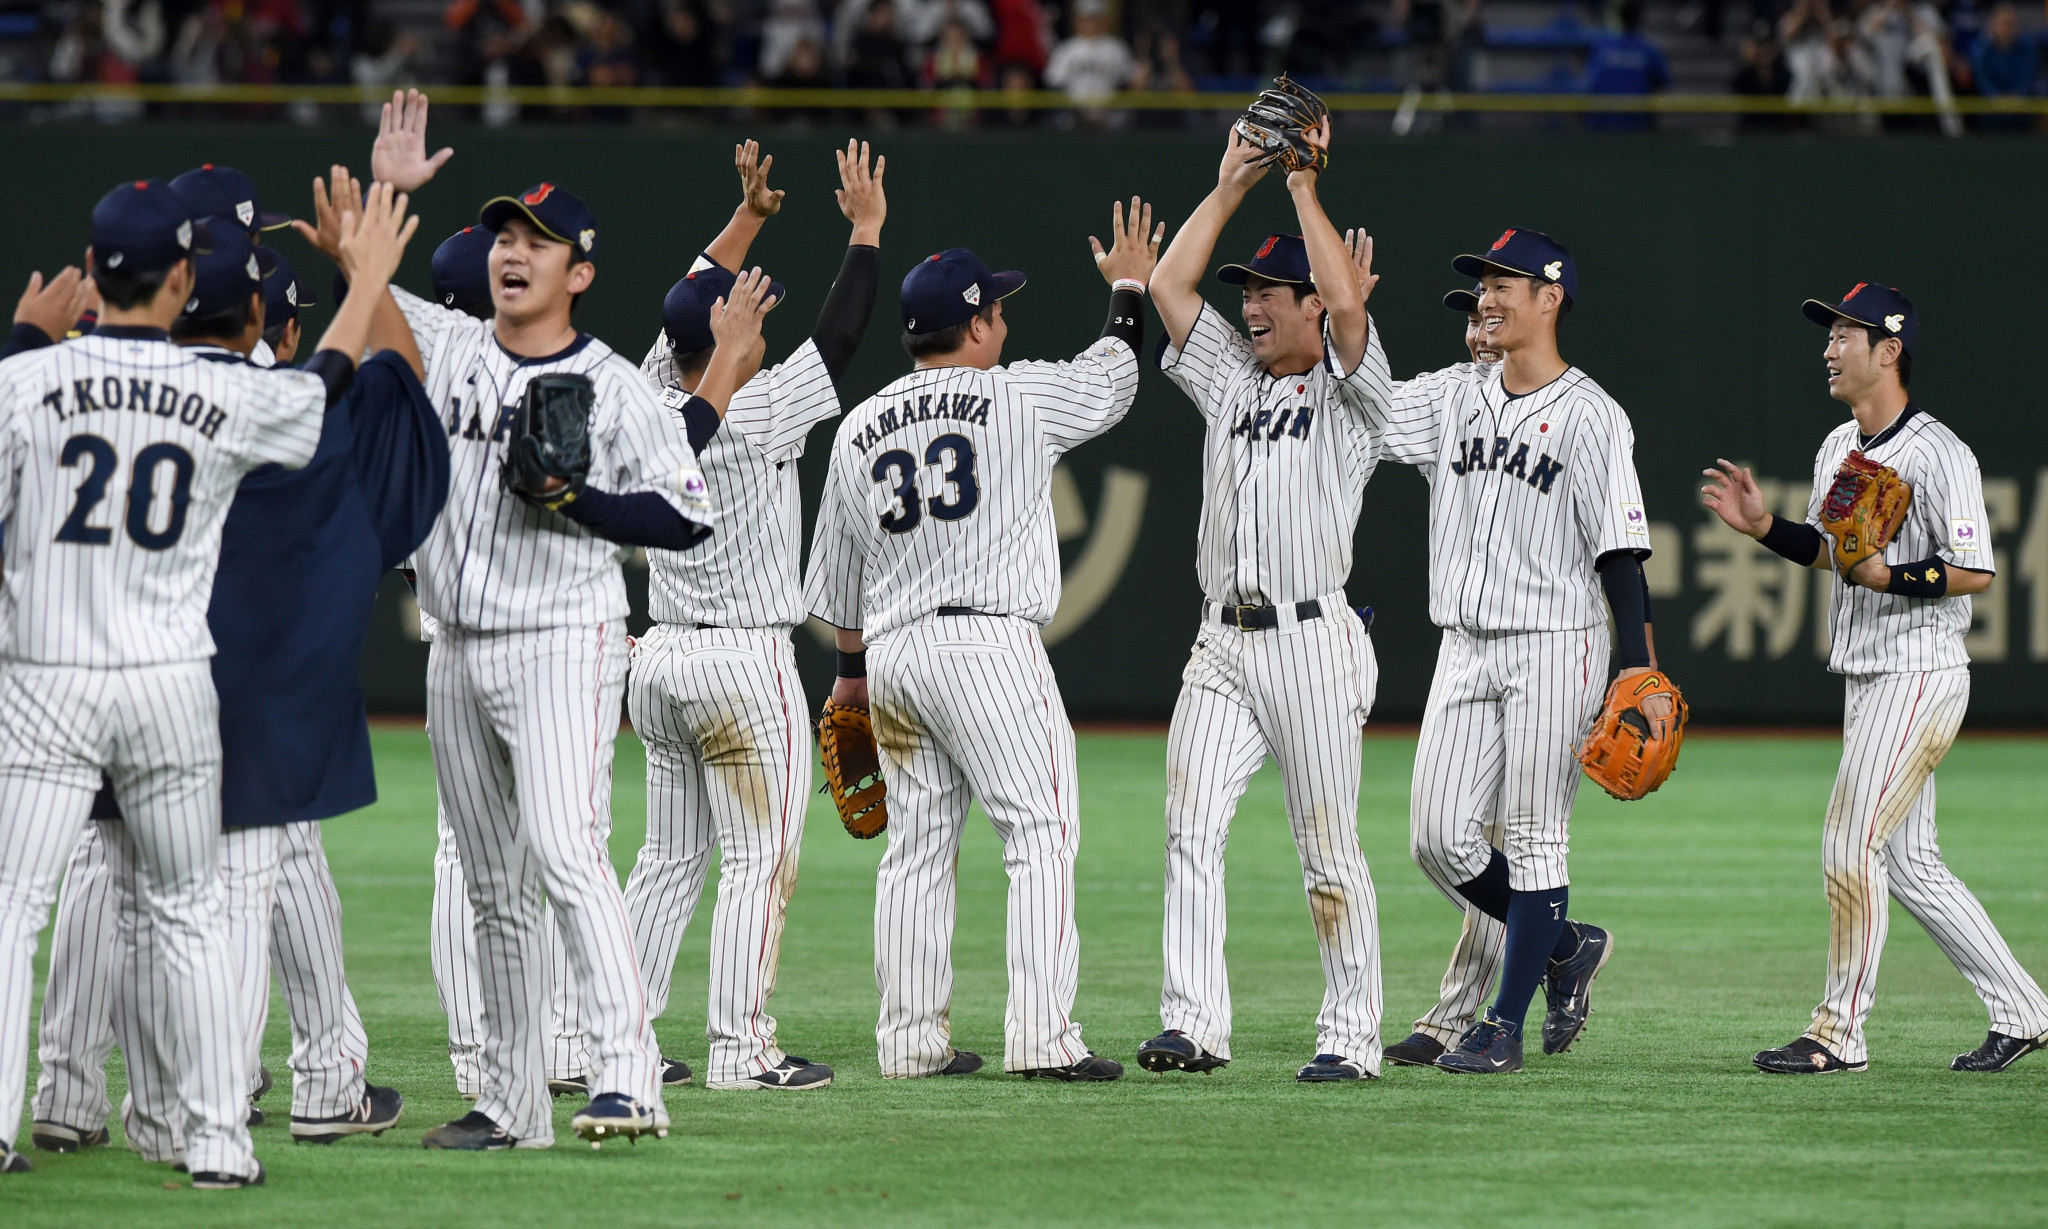 Japan remains the top-ranked WBSC Baseball World Rankings side for men ©Getty Images